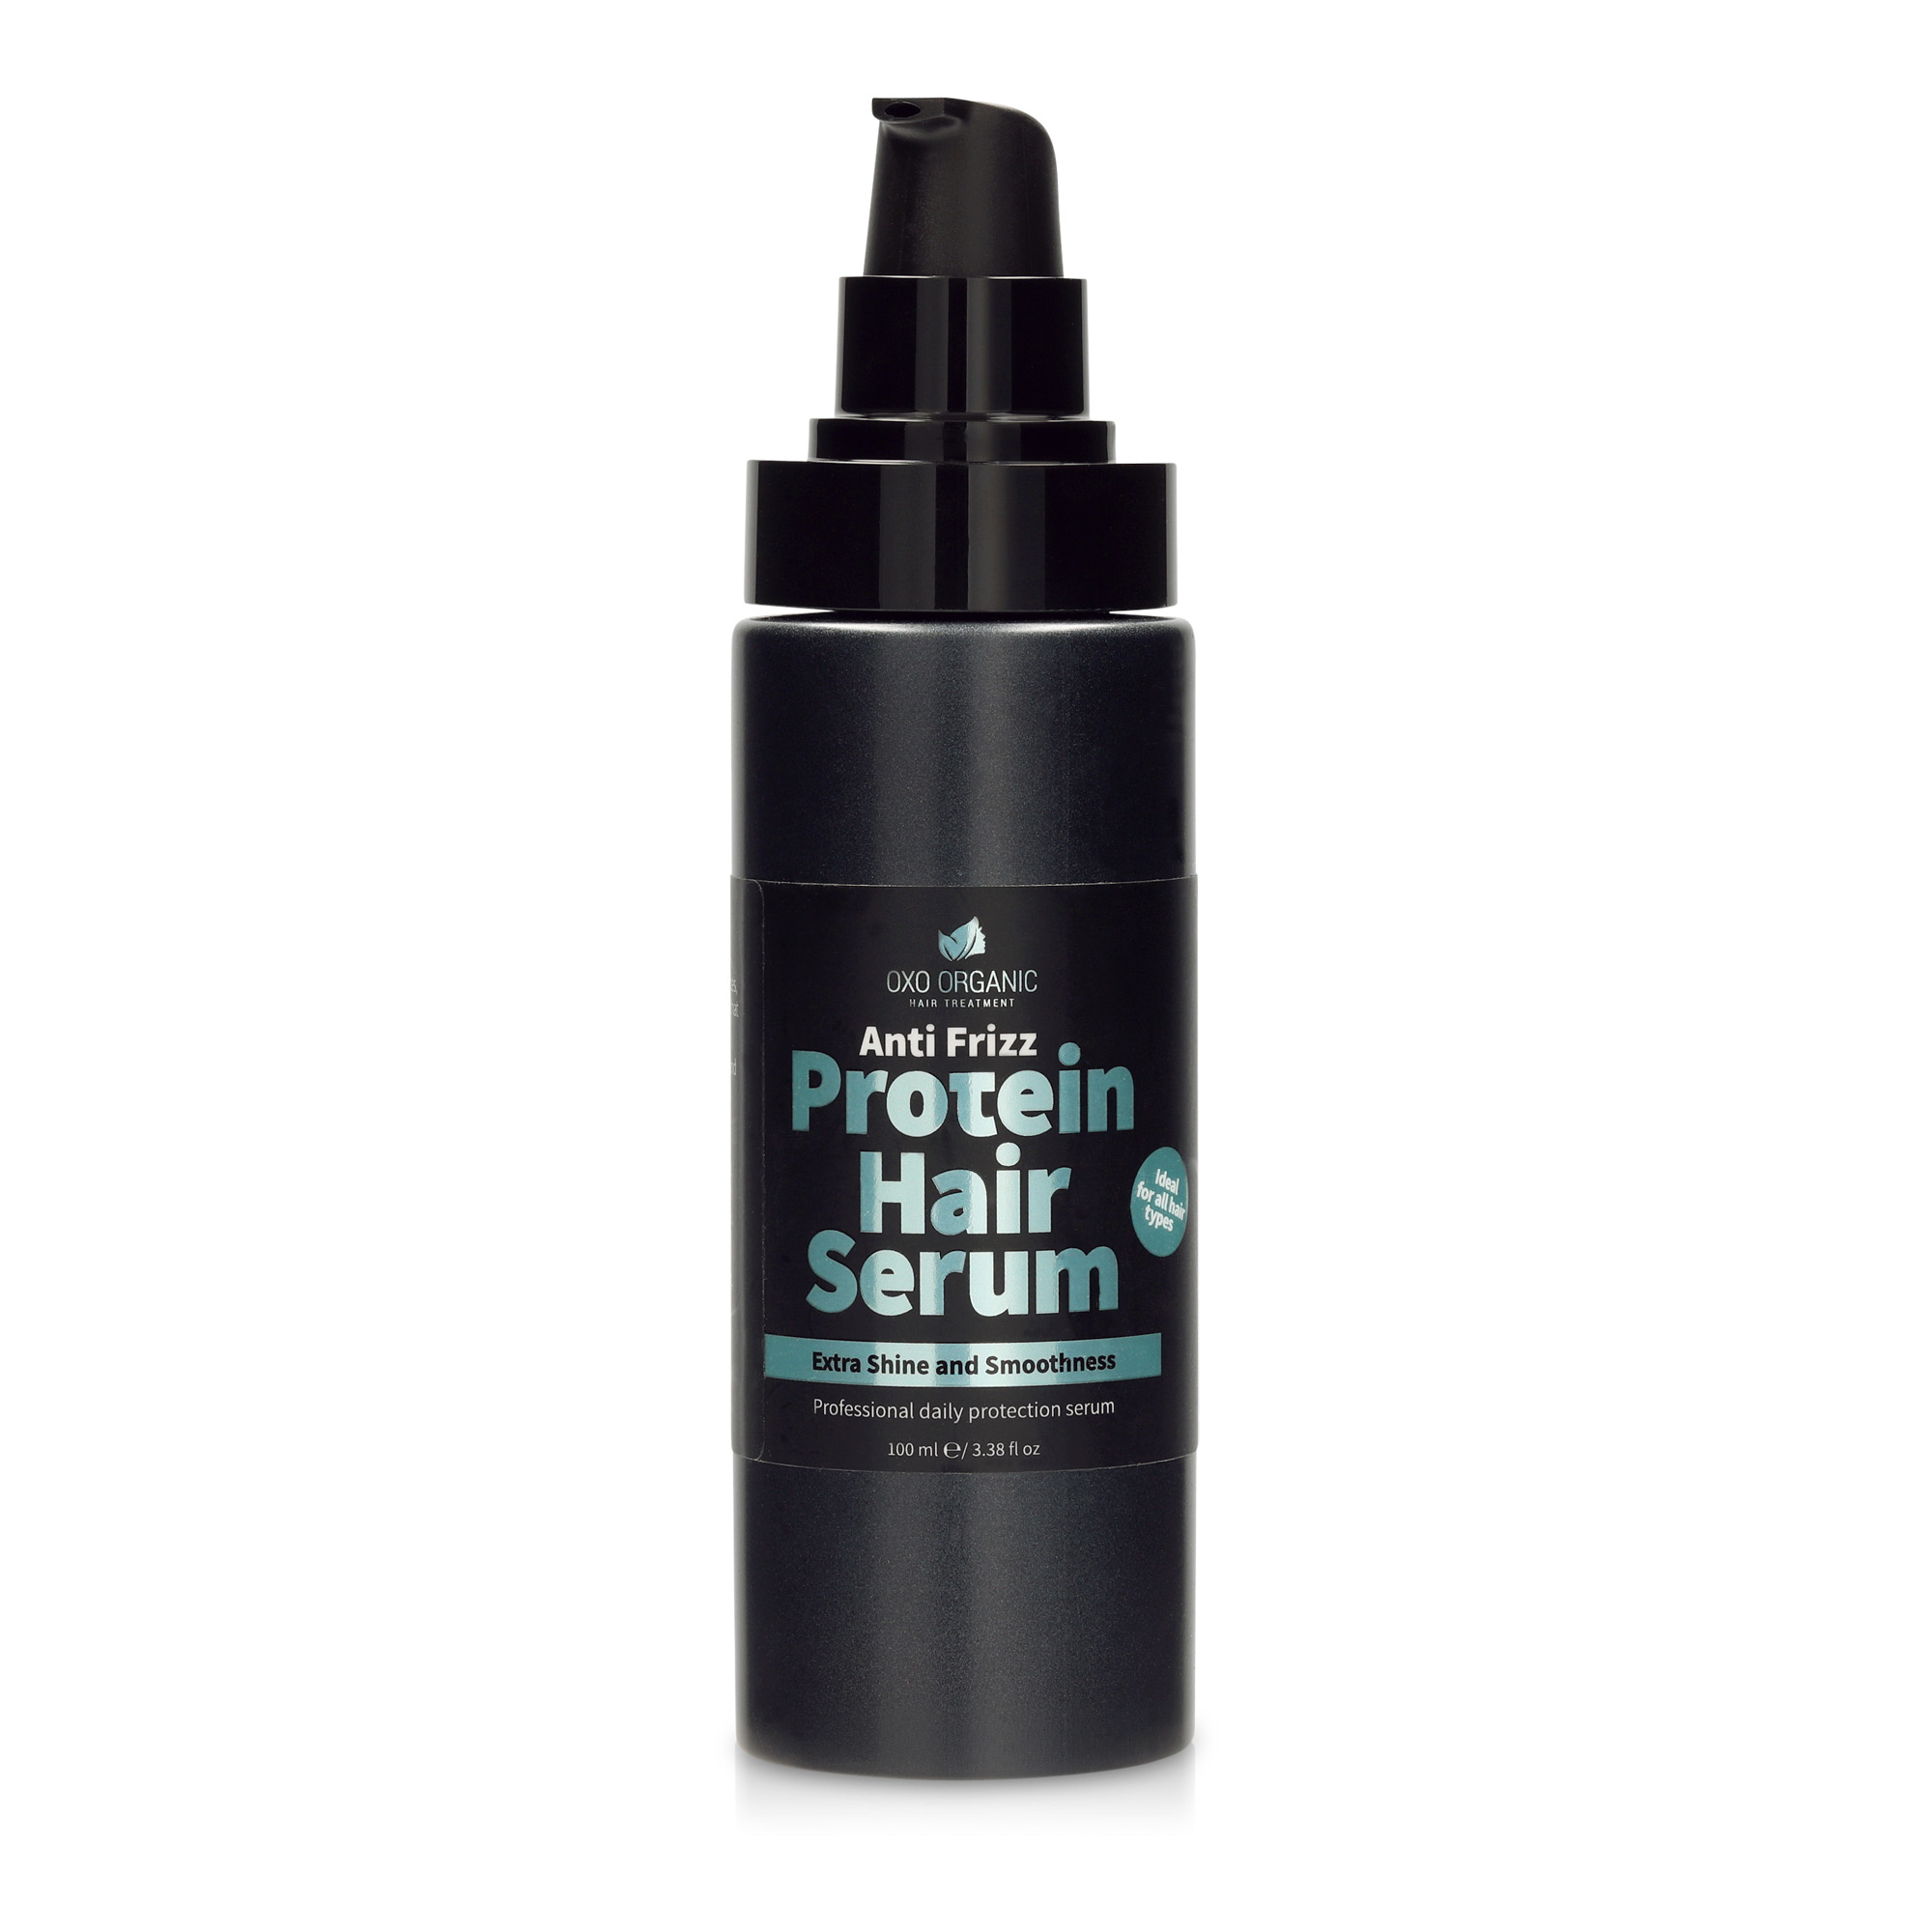 Hair Repair Oil - Oxo Organic - Professional Hair Care Products